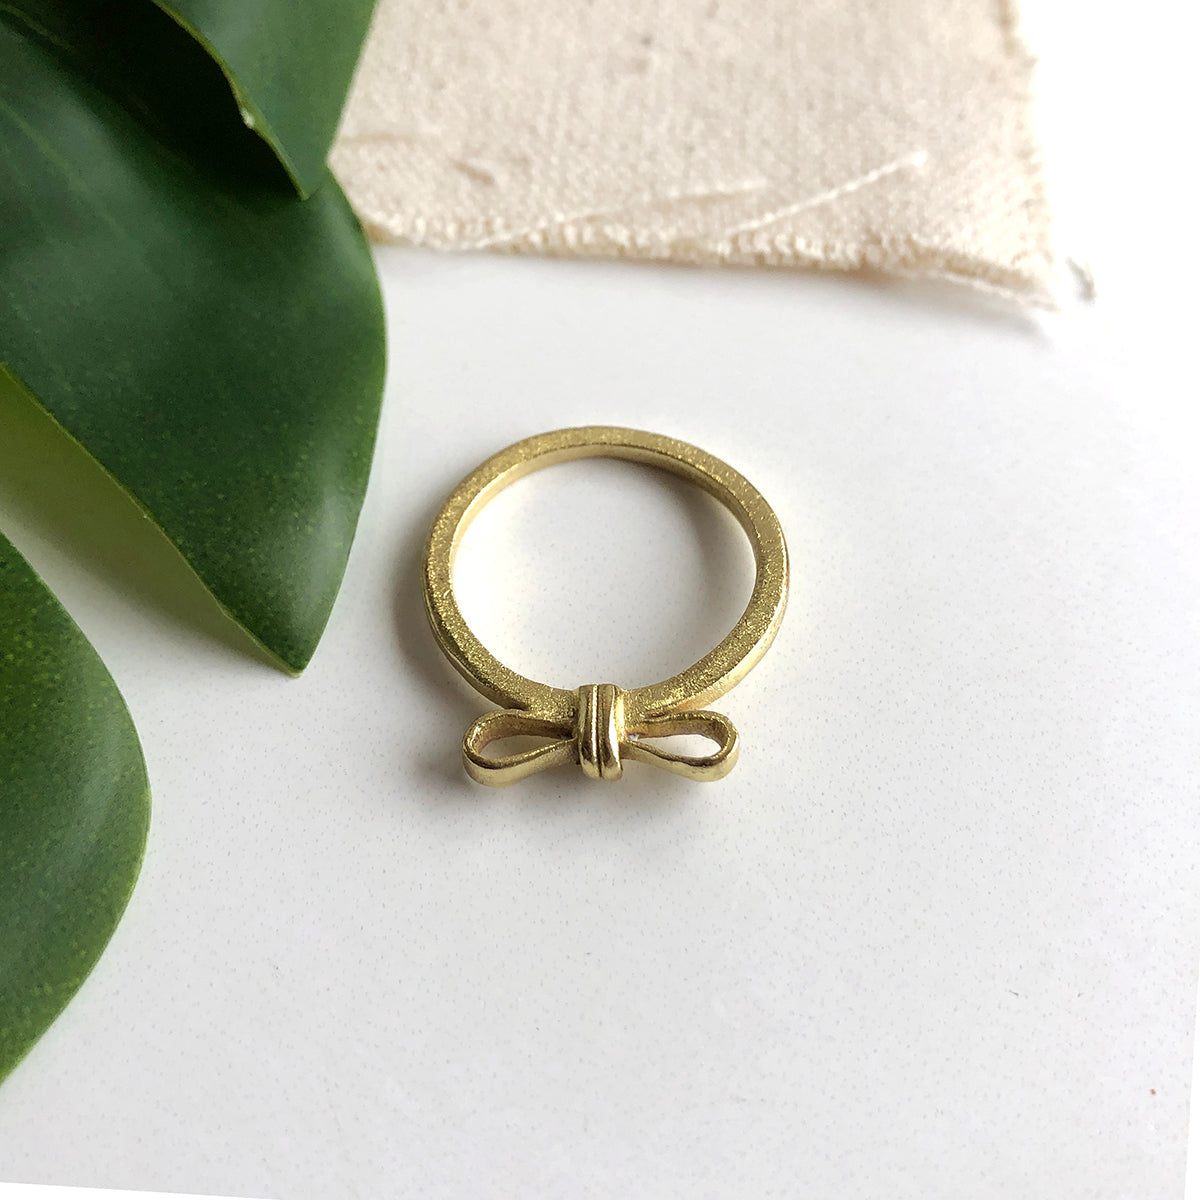 Photo of the gold “Wrapped Bow” Ring.